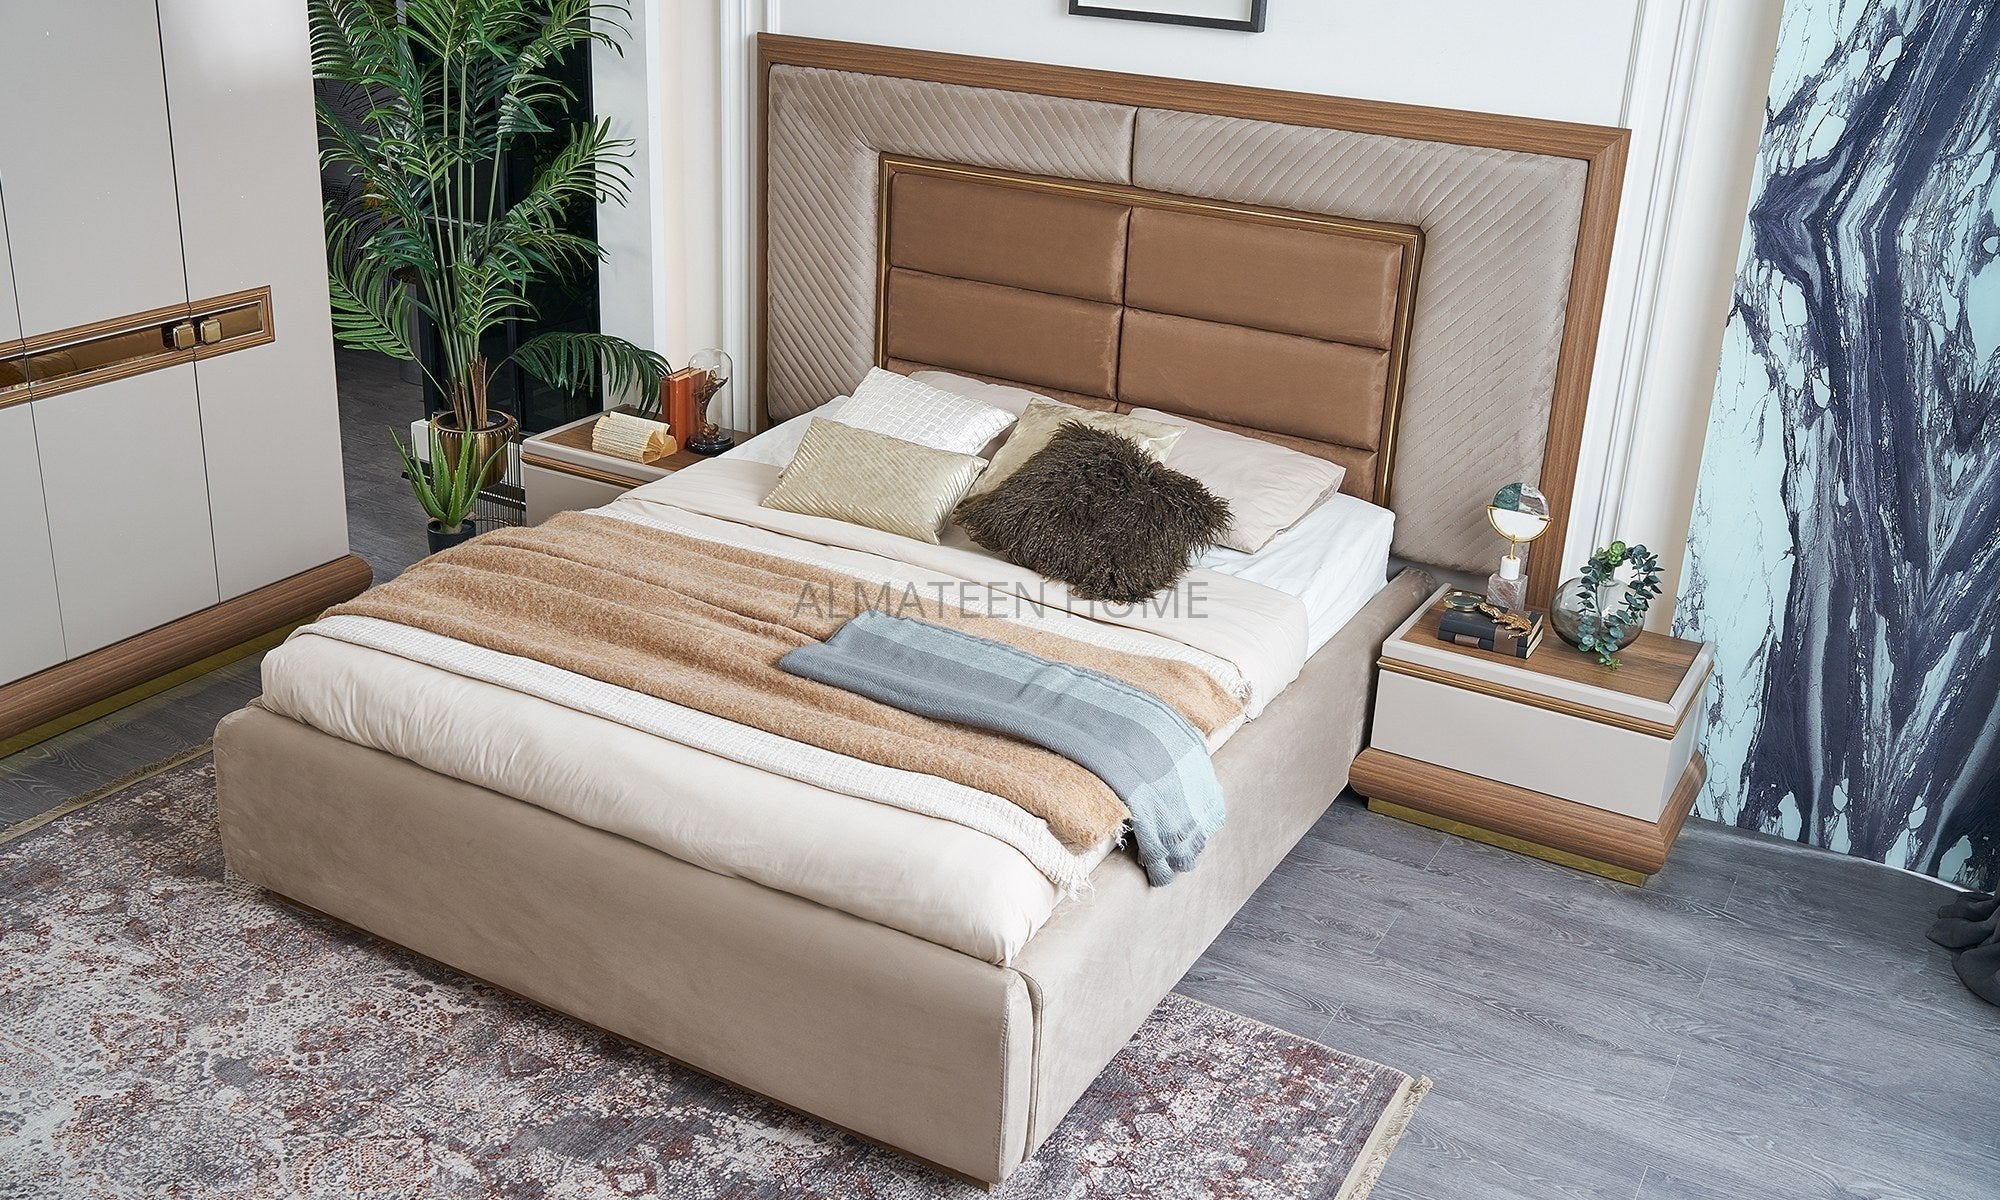 turkish-maya-bedroom-set-with-king-size-bed-dresser-wardrobe-and-side-tables-5- AL-Mateen Home